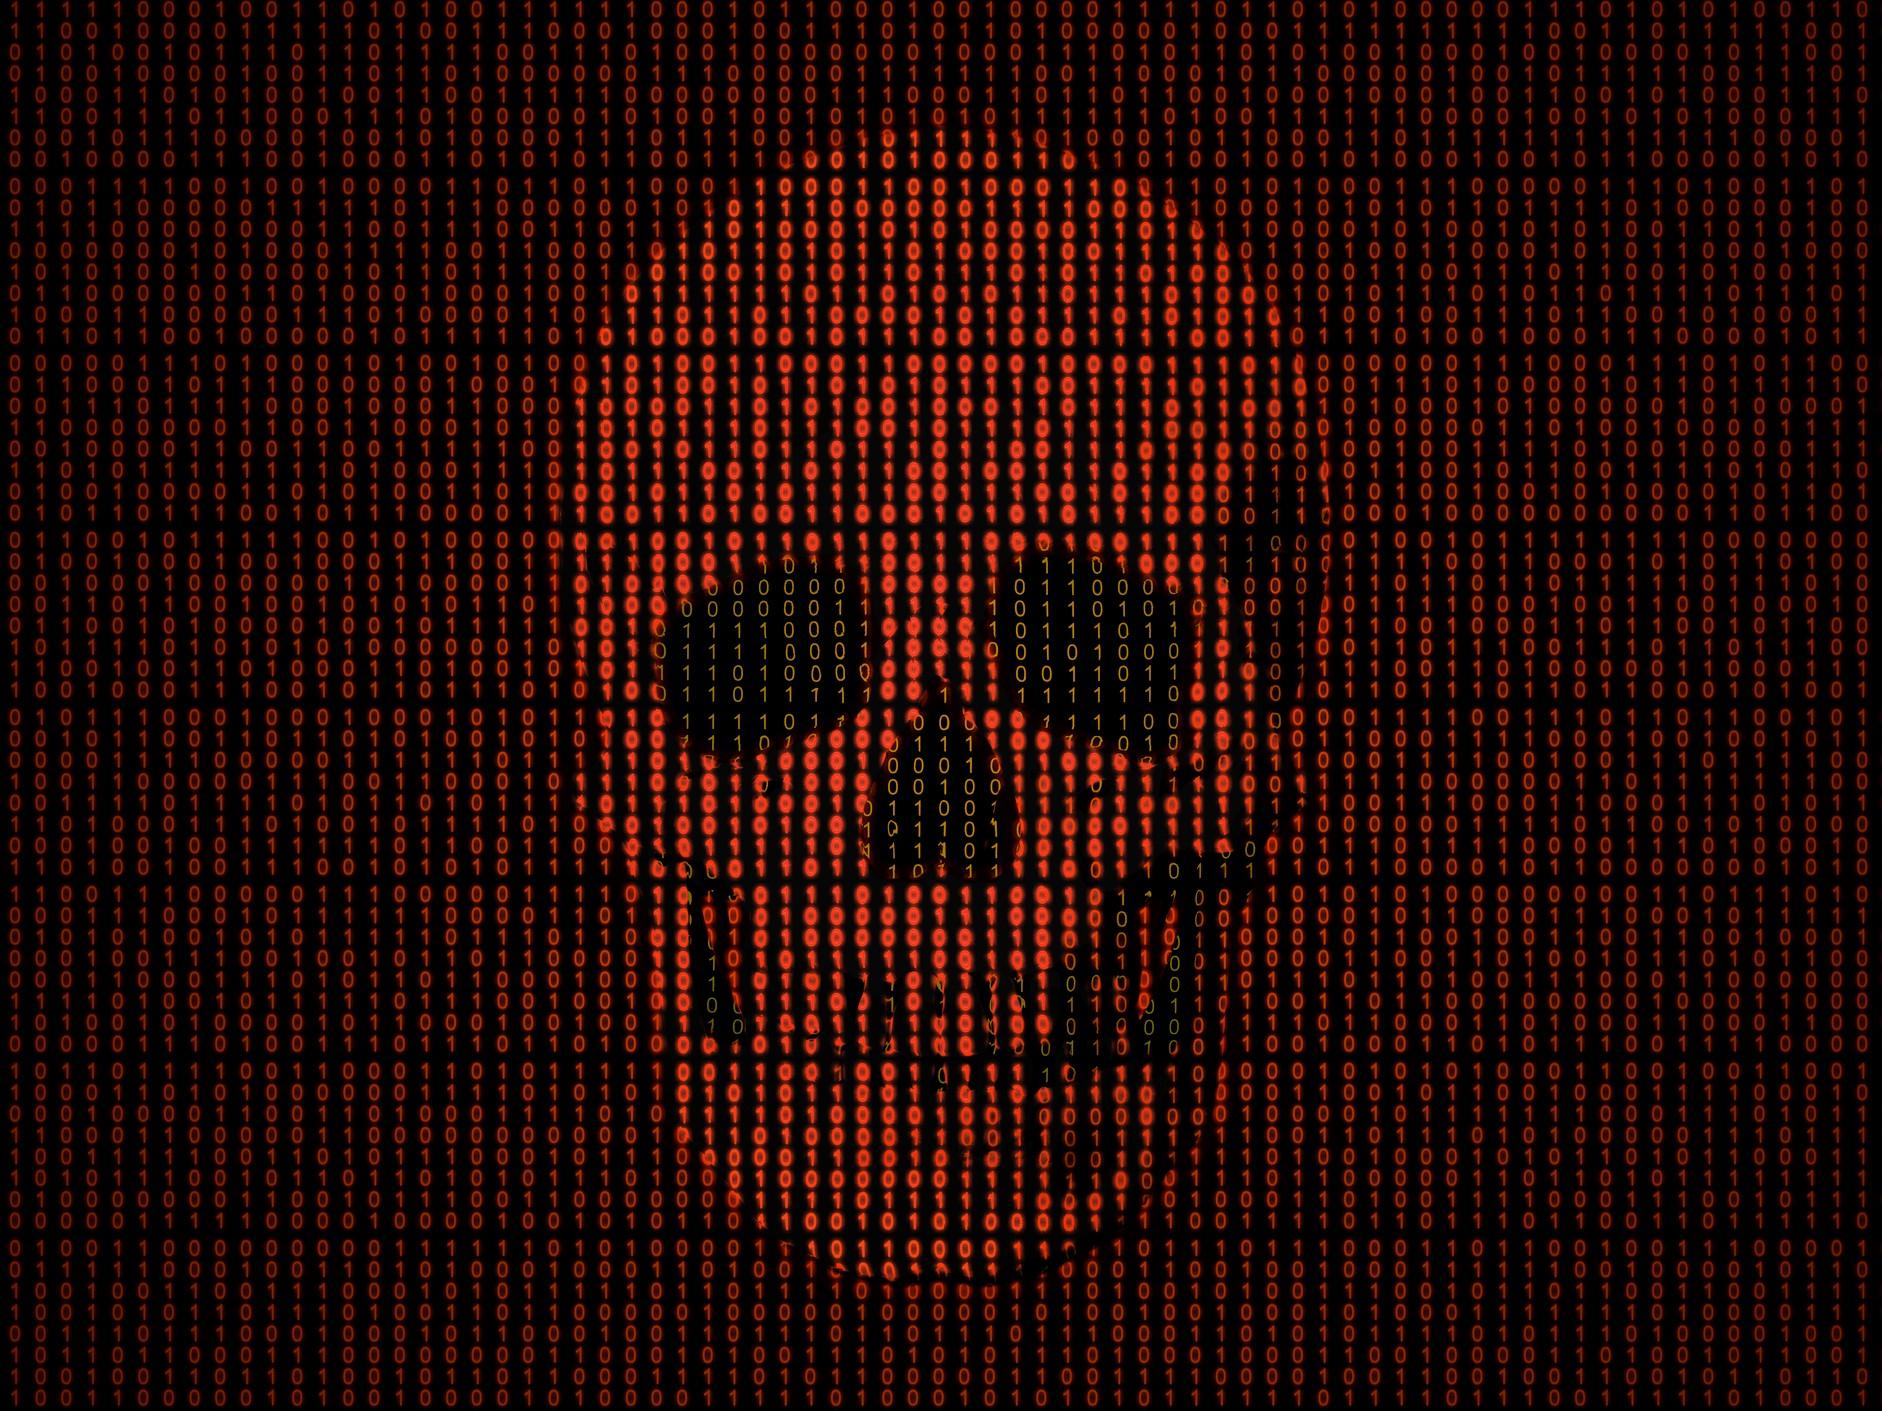 Personal healthcare records listed on the dark web can be extremely profitable for cyber criminals